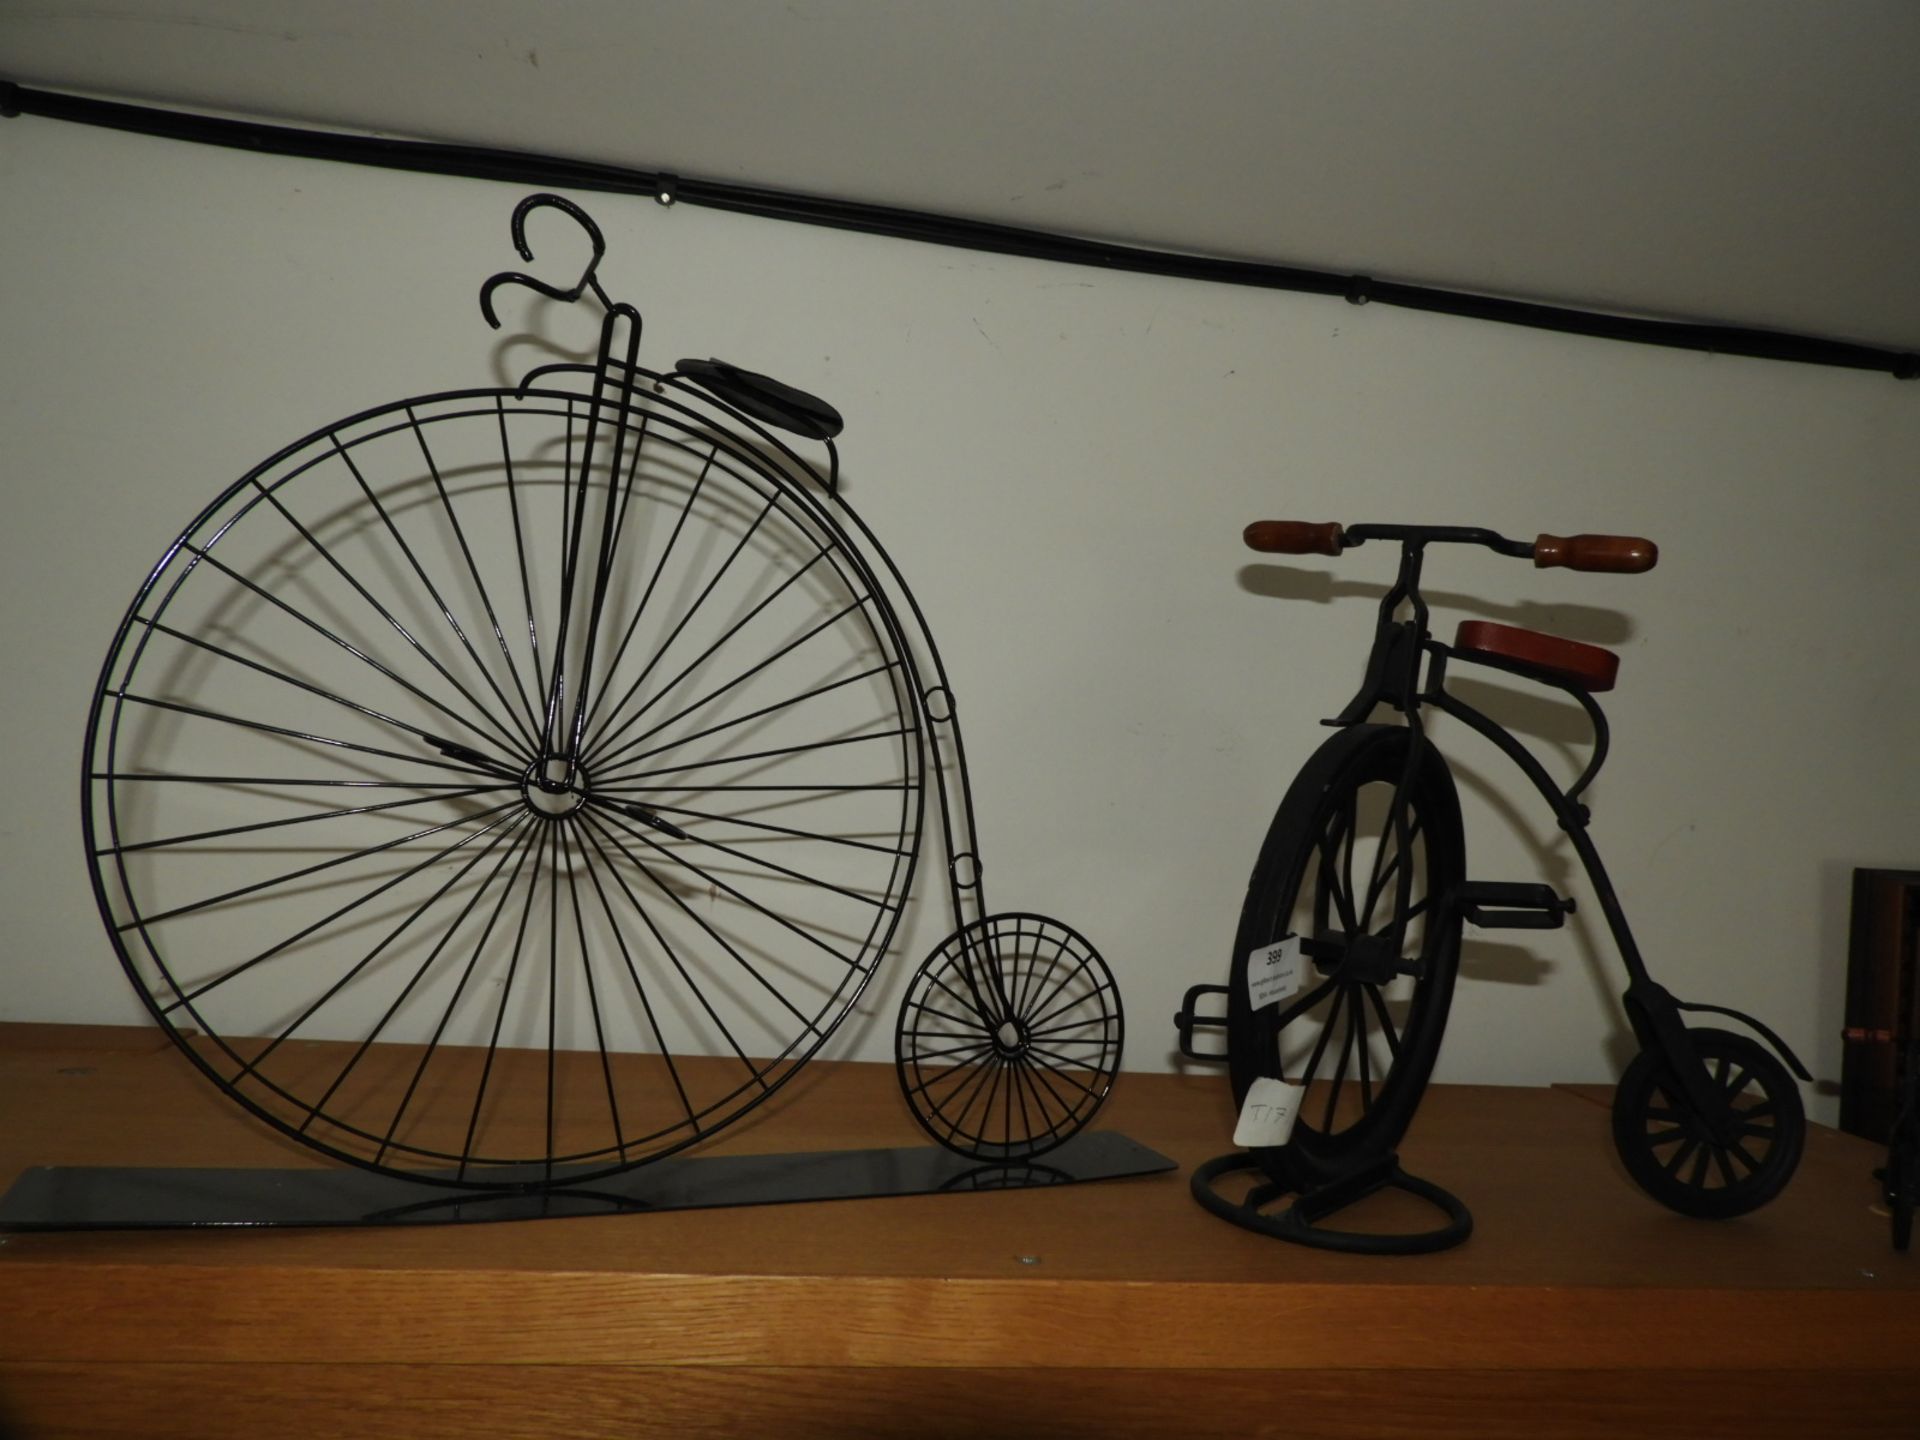 Two Metal Unicycle Ornaments